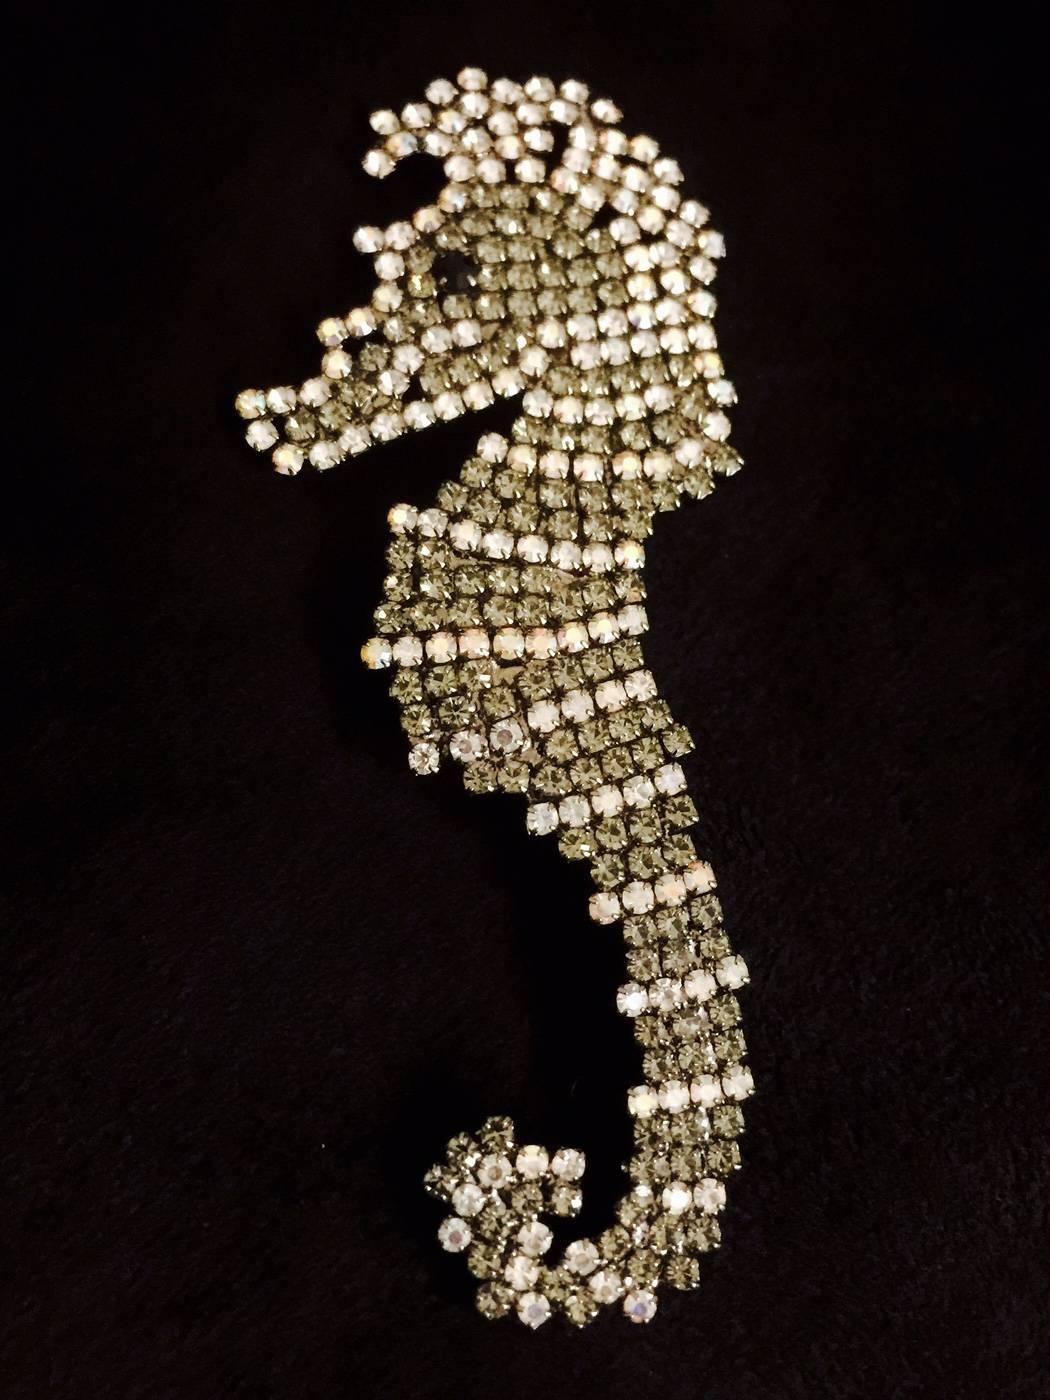 A must have summer accessory!  This large seahorse brooch comes from Giorgio Armani, noted for classic pieces.  An impressive 5.25